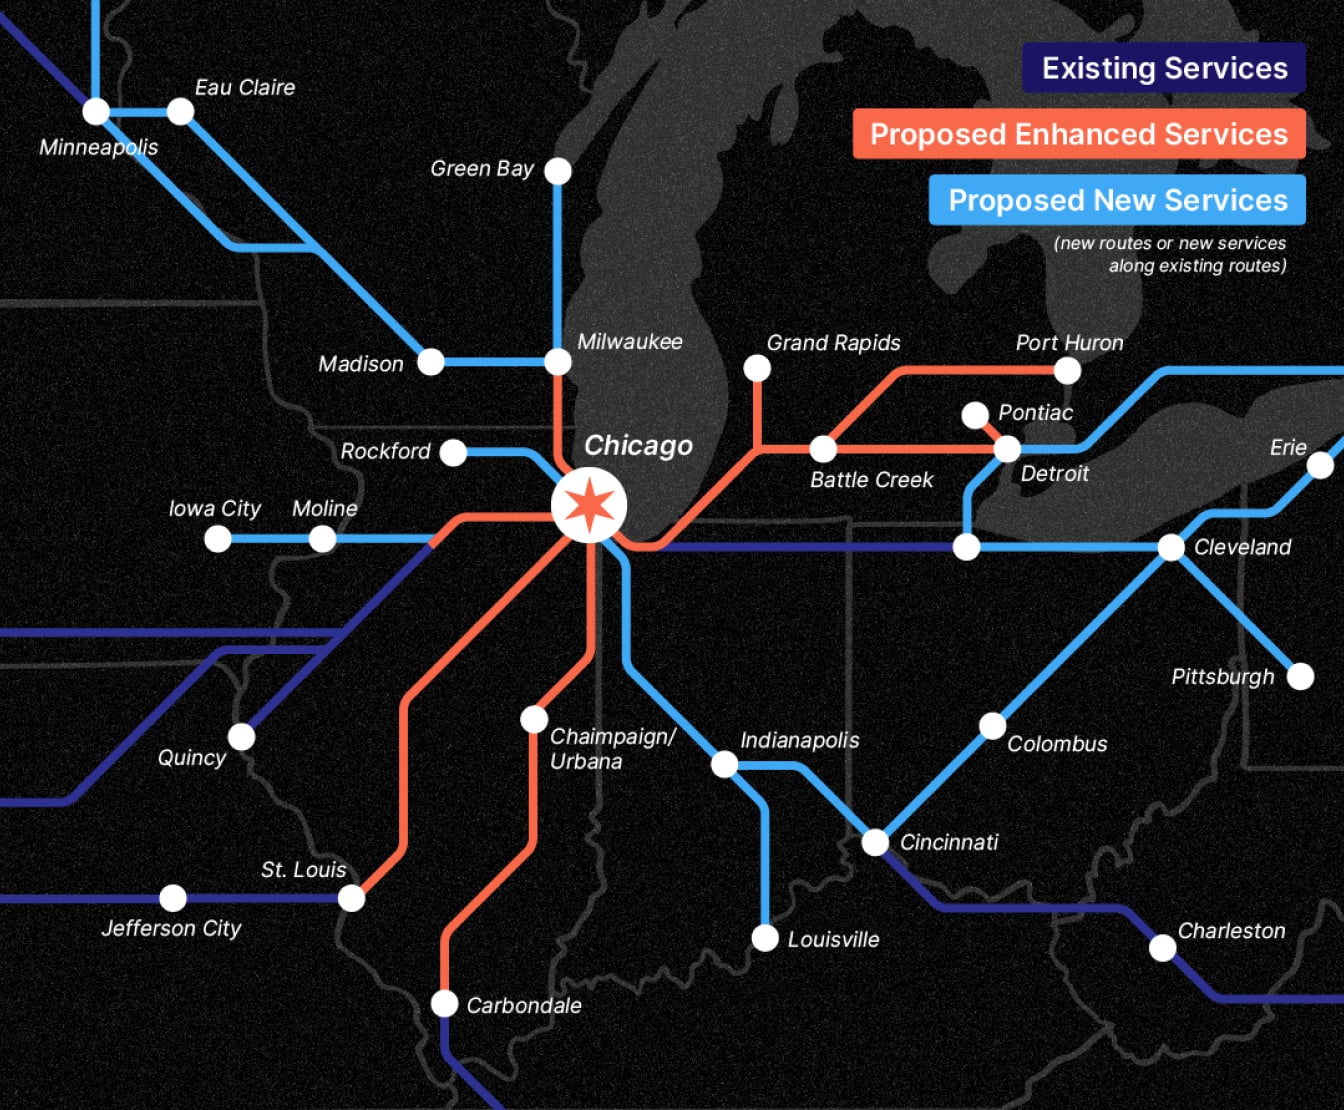 Existing, proposed enhanced, and proposed new train services around the Chicago area.